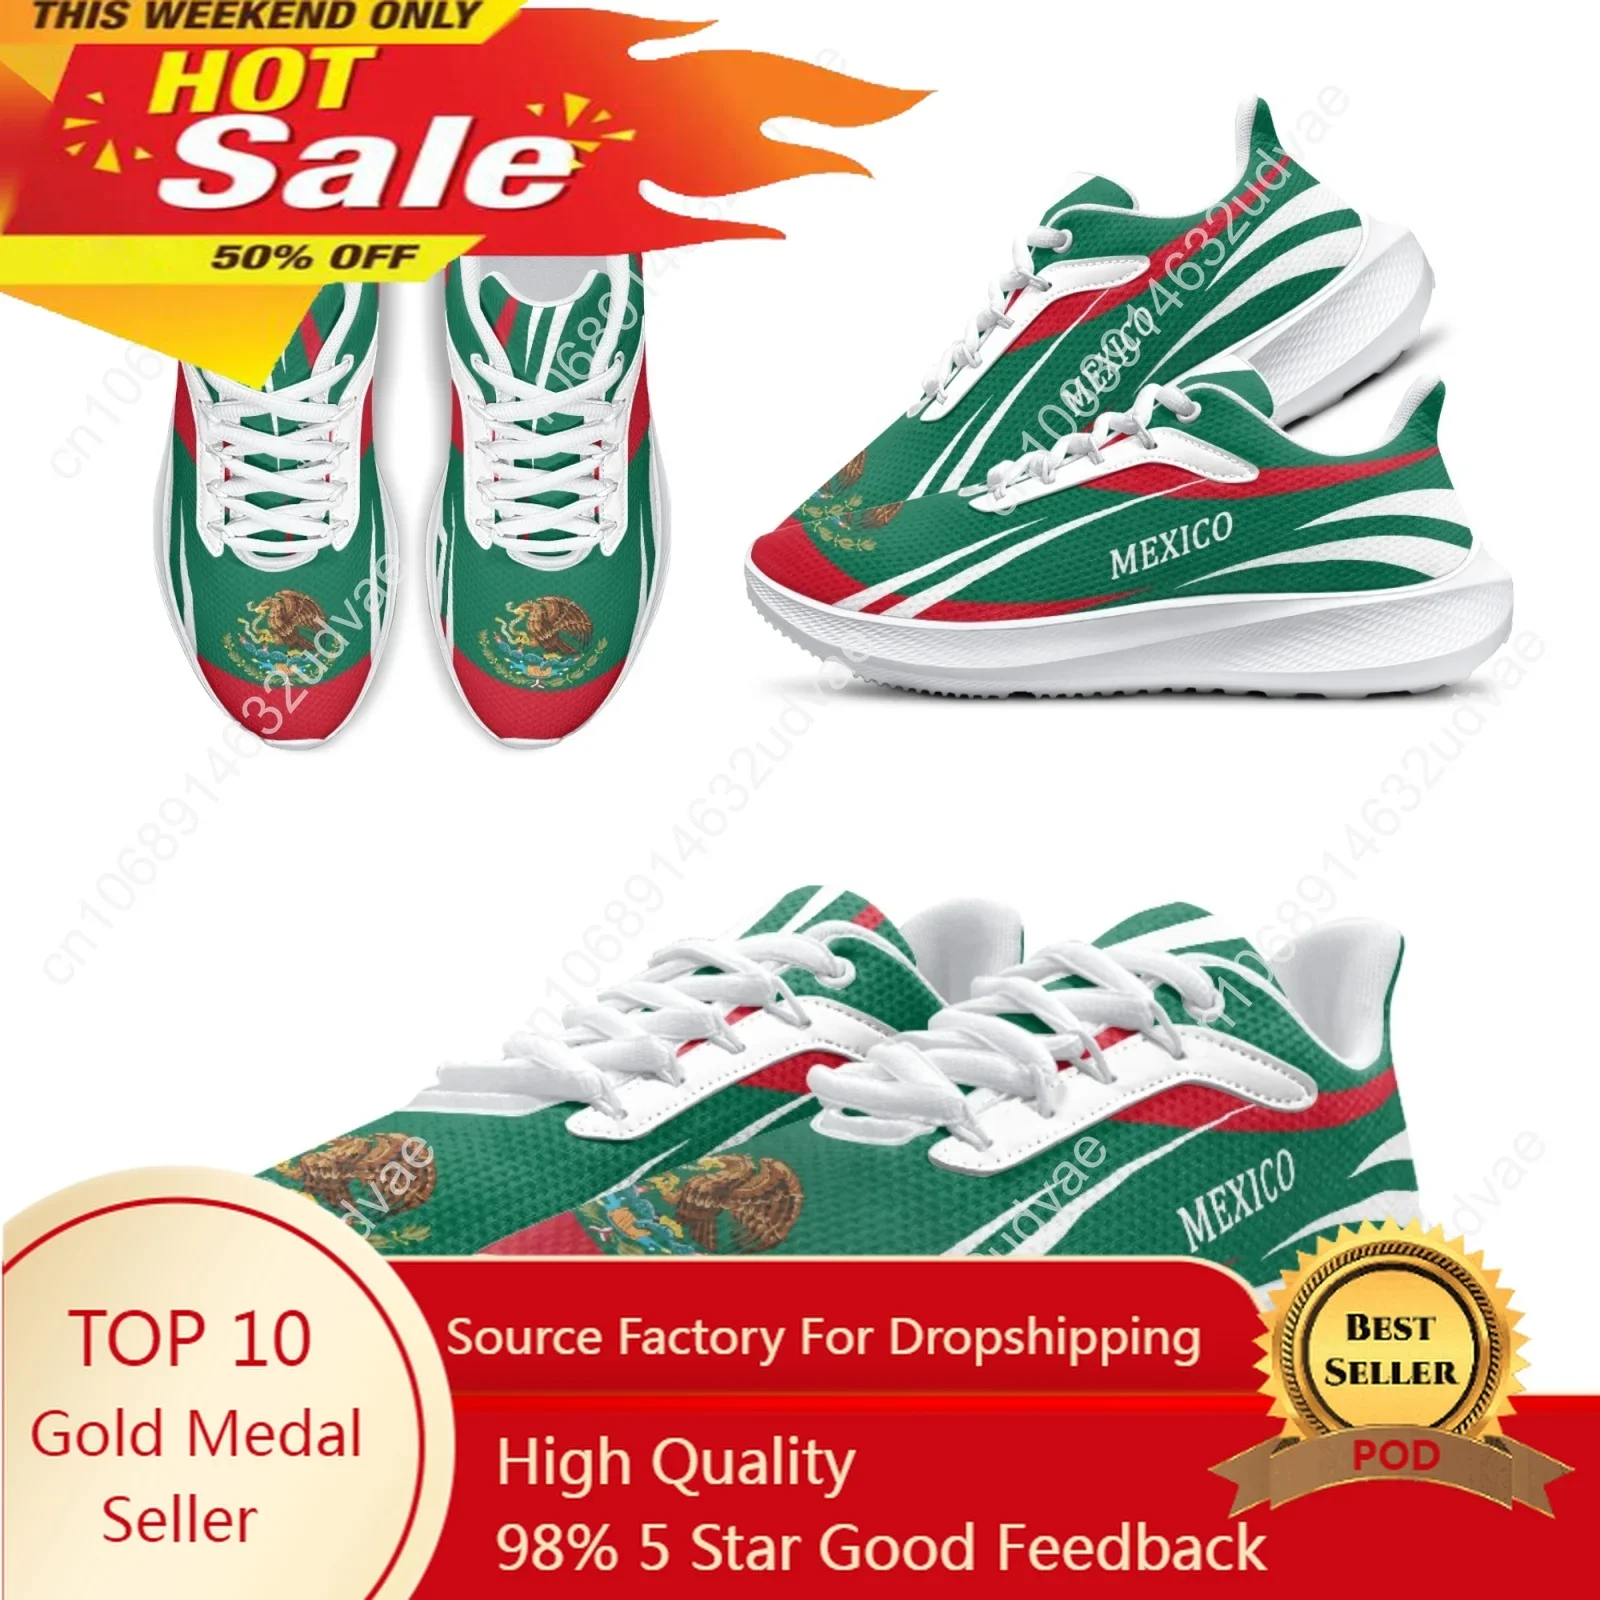 

New Green Sneakers Women's Mexico Flag Lightweight Outdoor Sneakers Lace-up Casual Shoes Zapatos Mujer Planos